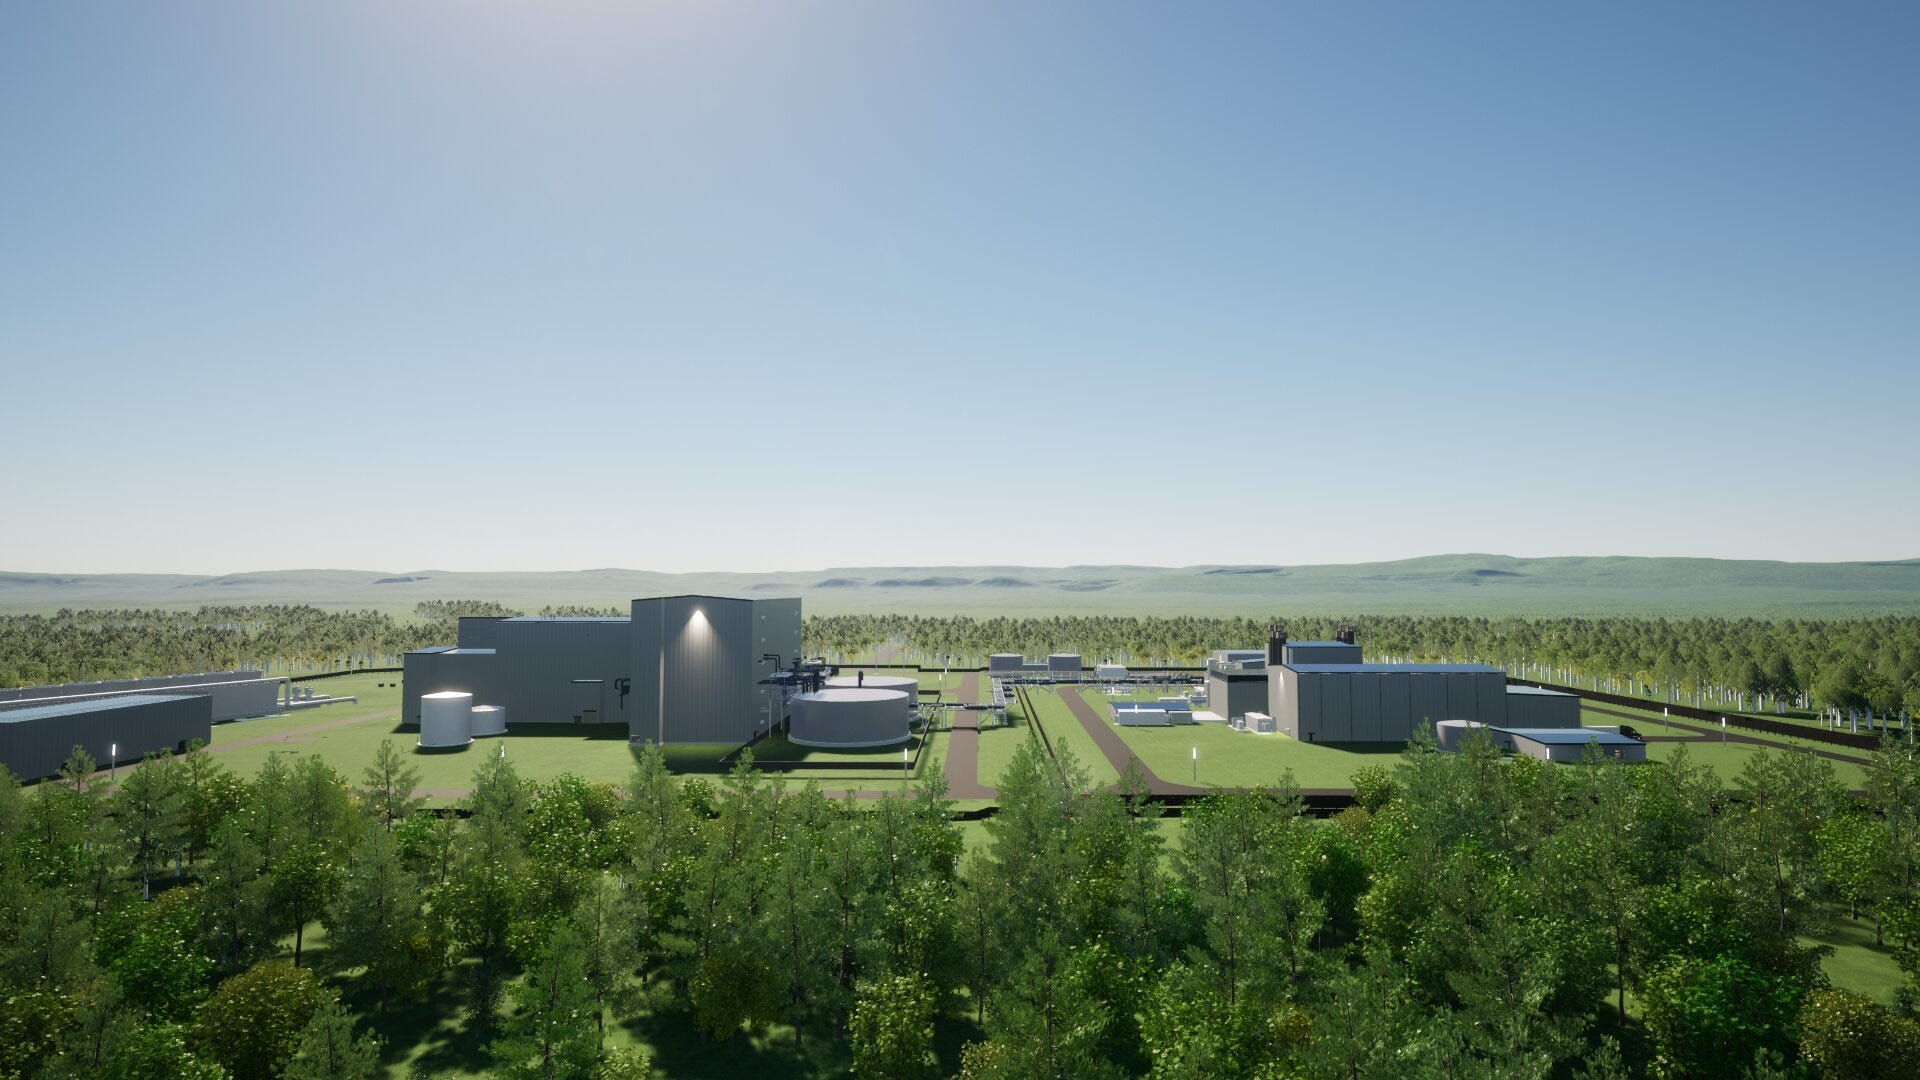 microsoft, a bill gates company is about to start building a nuclear power plant in wyoming